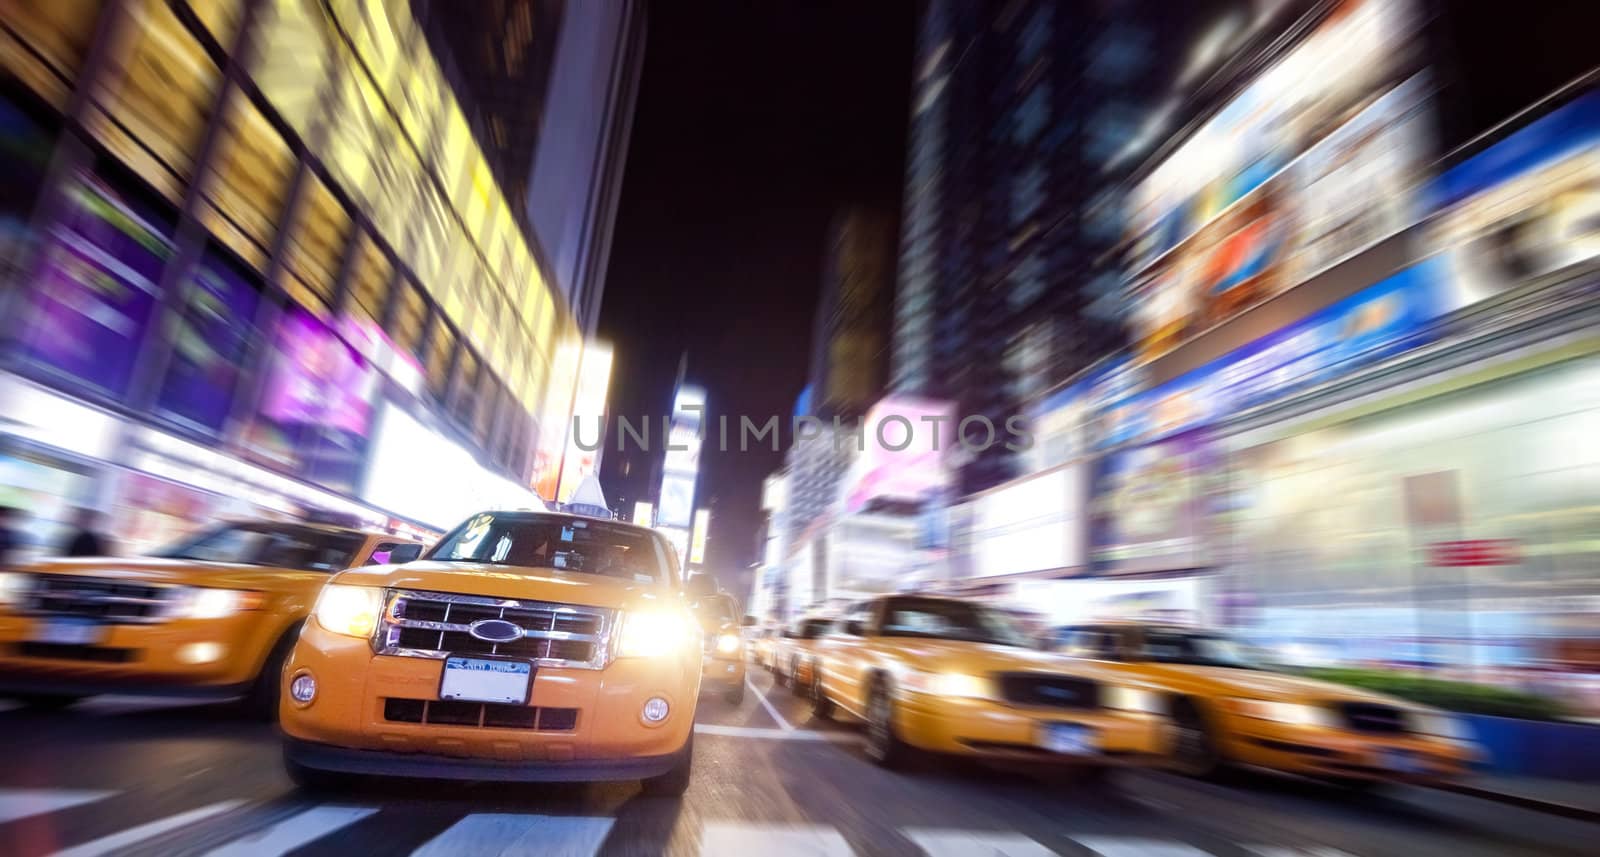 Time Square full of Taxi Cabs in the night